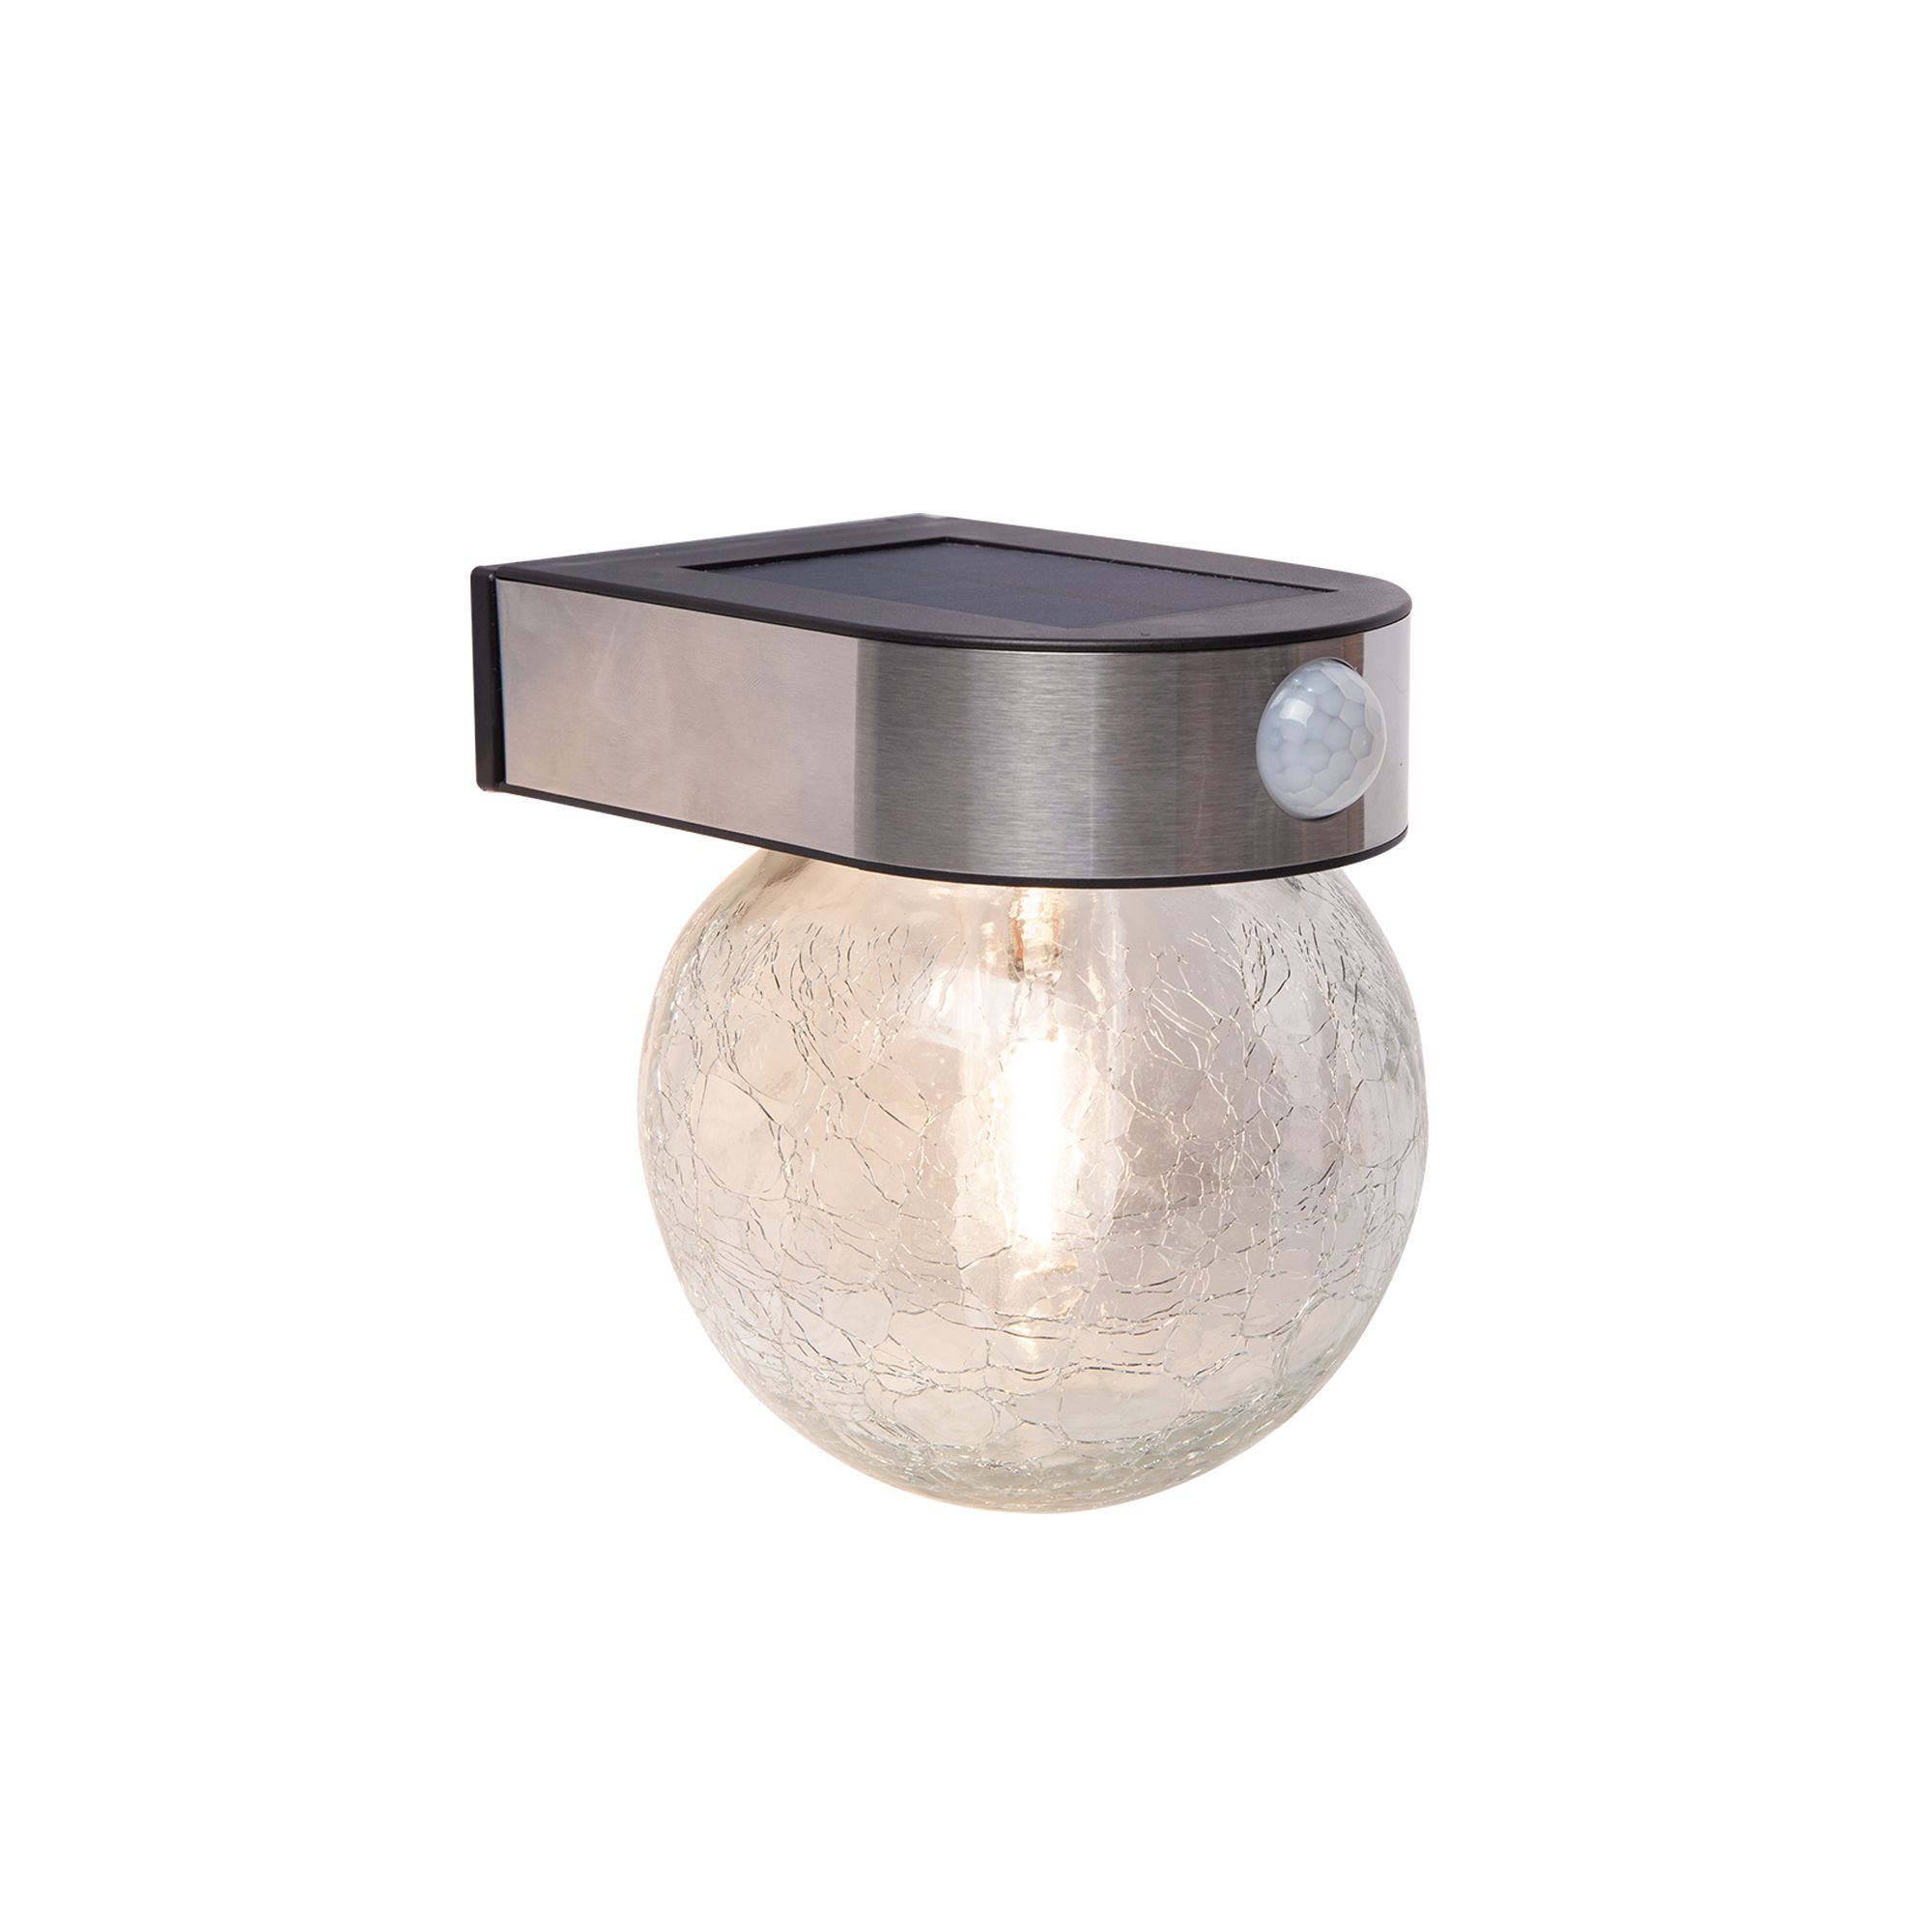 Longny Crackle glass ball Adjustable Brushed Silver effect Solar-powered Integrated LED PIR Motion sensor Outdoor Wall light